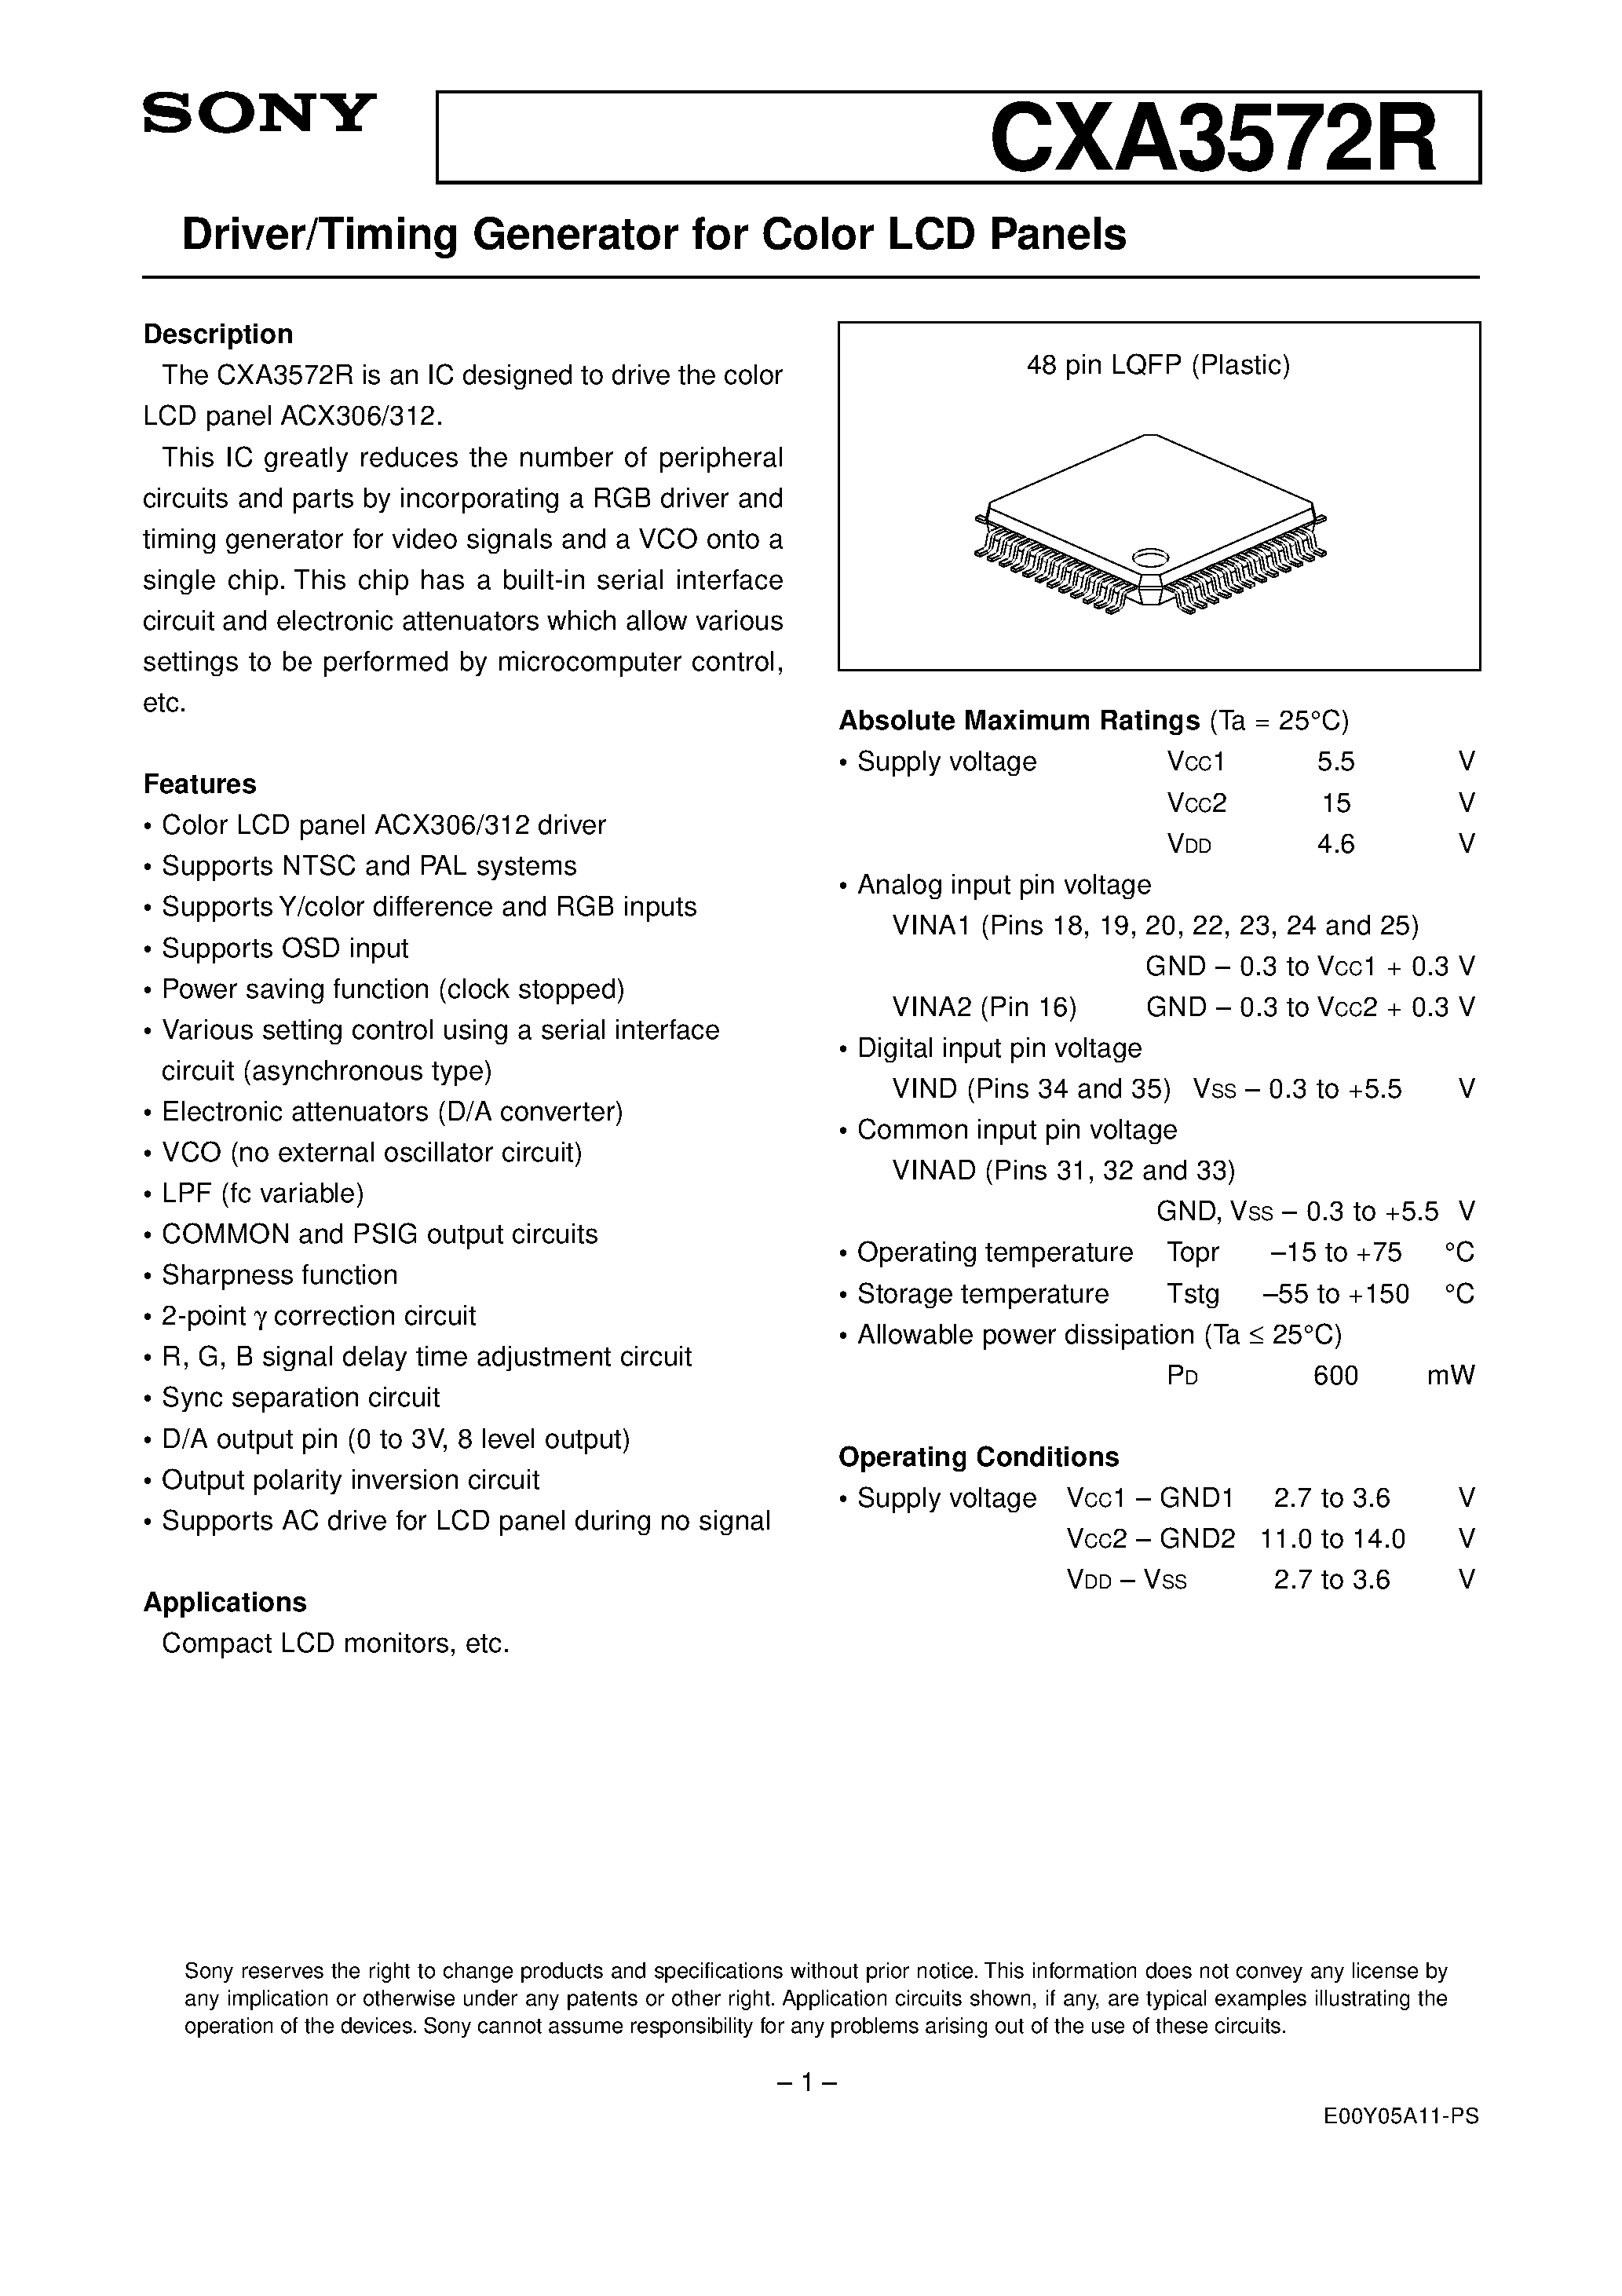 Datasheet CXA3572R - Driver/Timing Generator for Color LCD Panels page 1